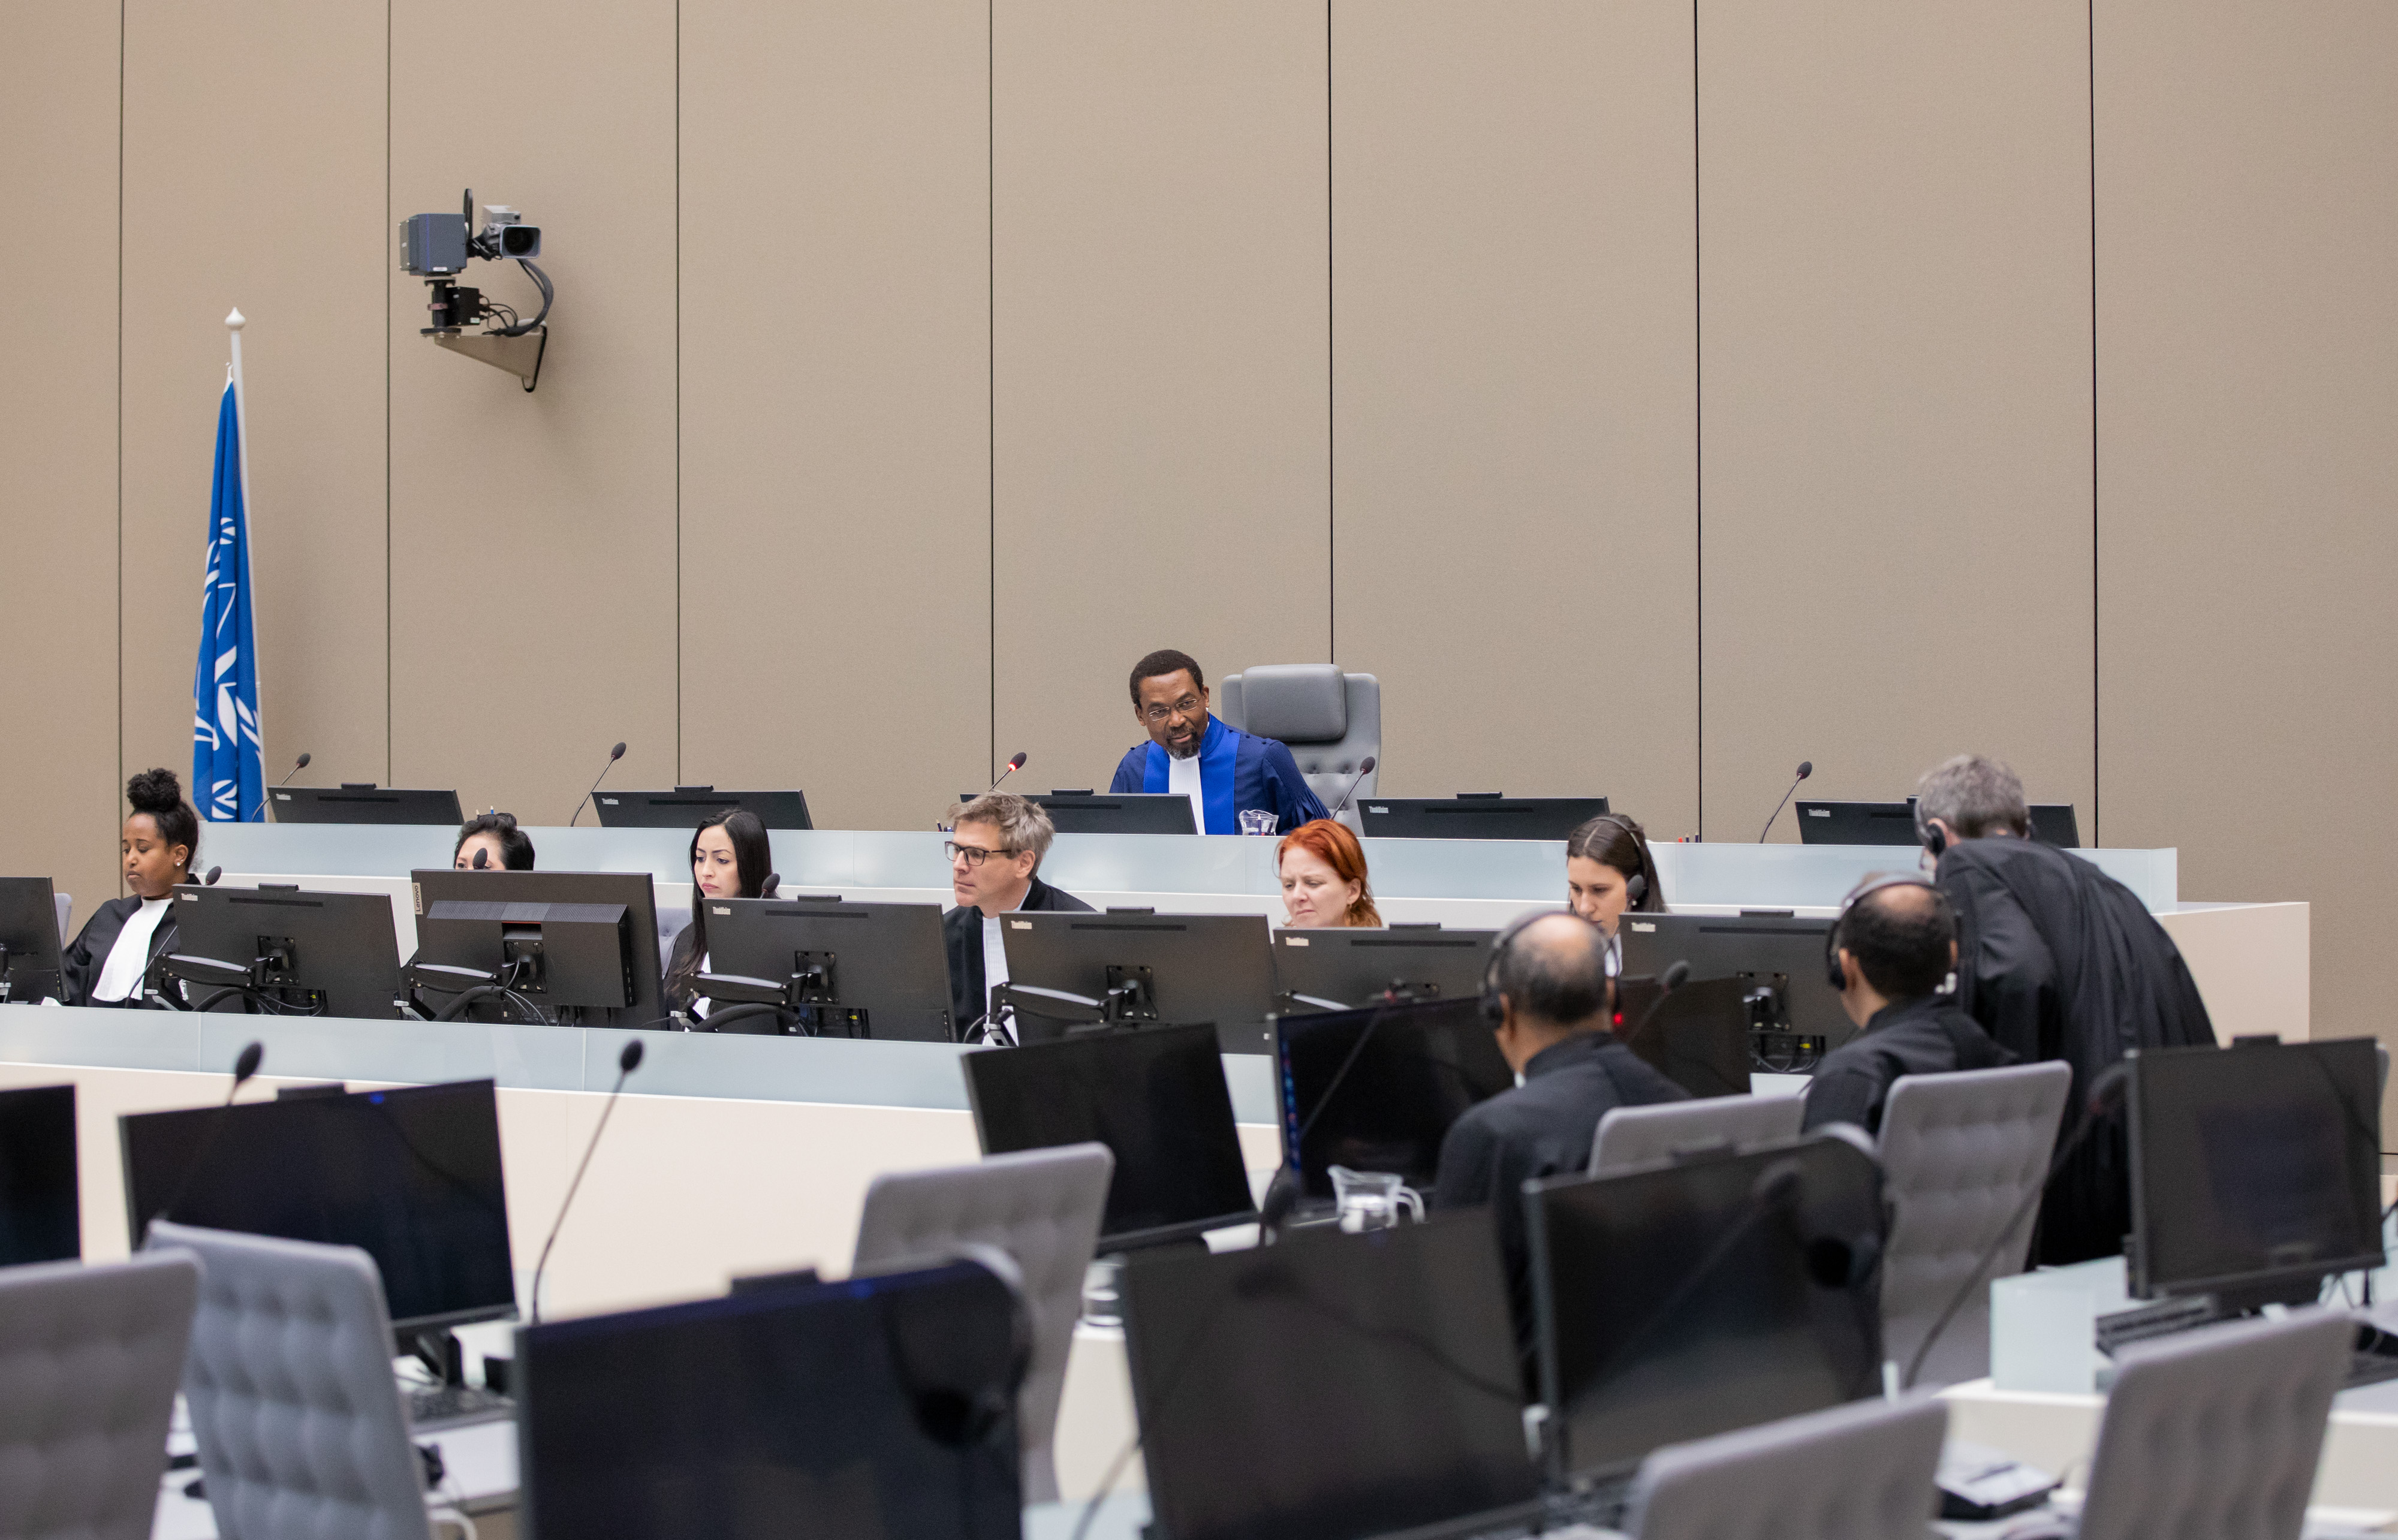 Judge Chile Eboe-Osuji, presiding judge on the appeal regarding the admissibility of the case against Saif Al-Islam Gaddafi, on 9 March 2020 at the International Criminal Court in The Hague (Netherlands) © ICC-CPI